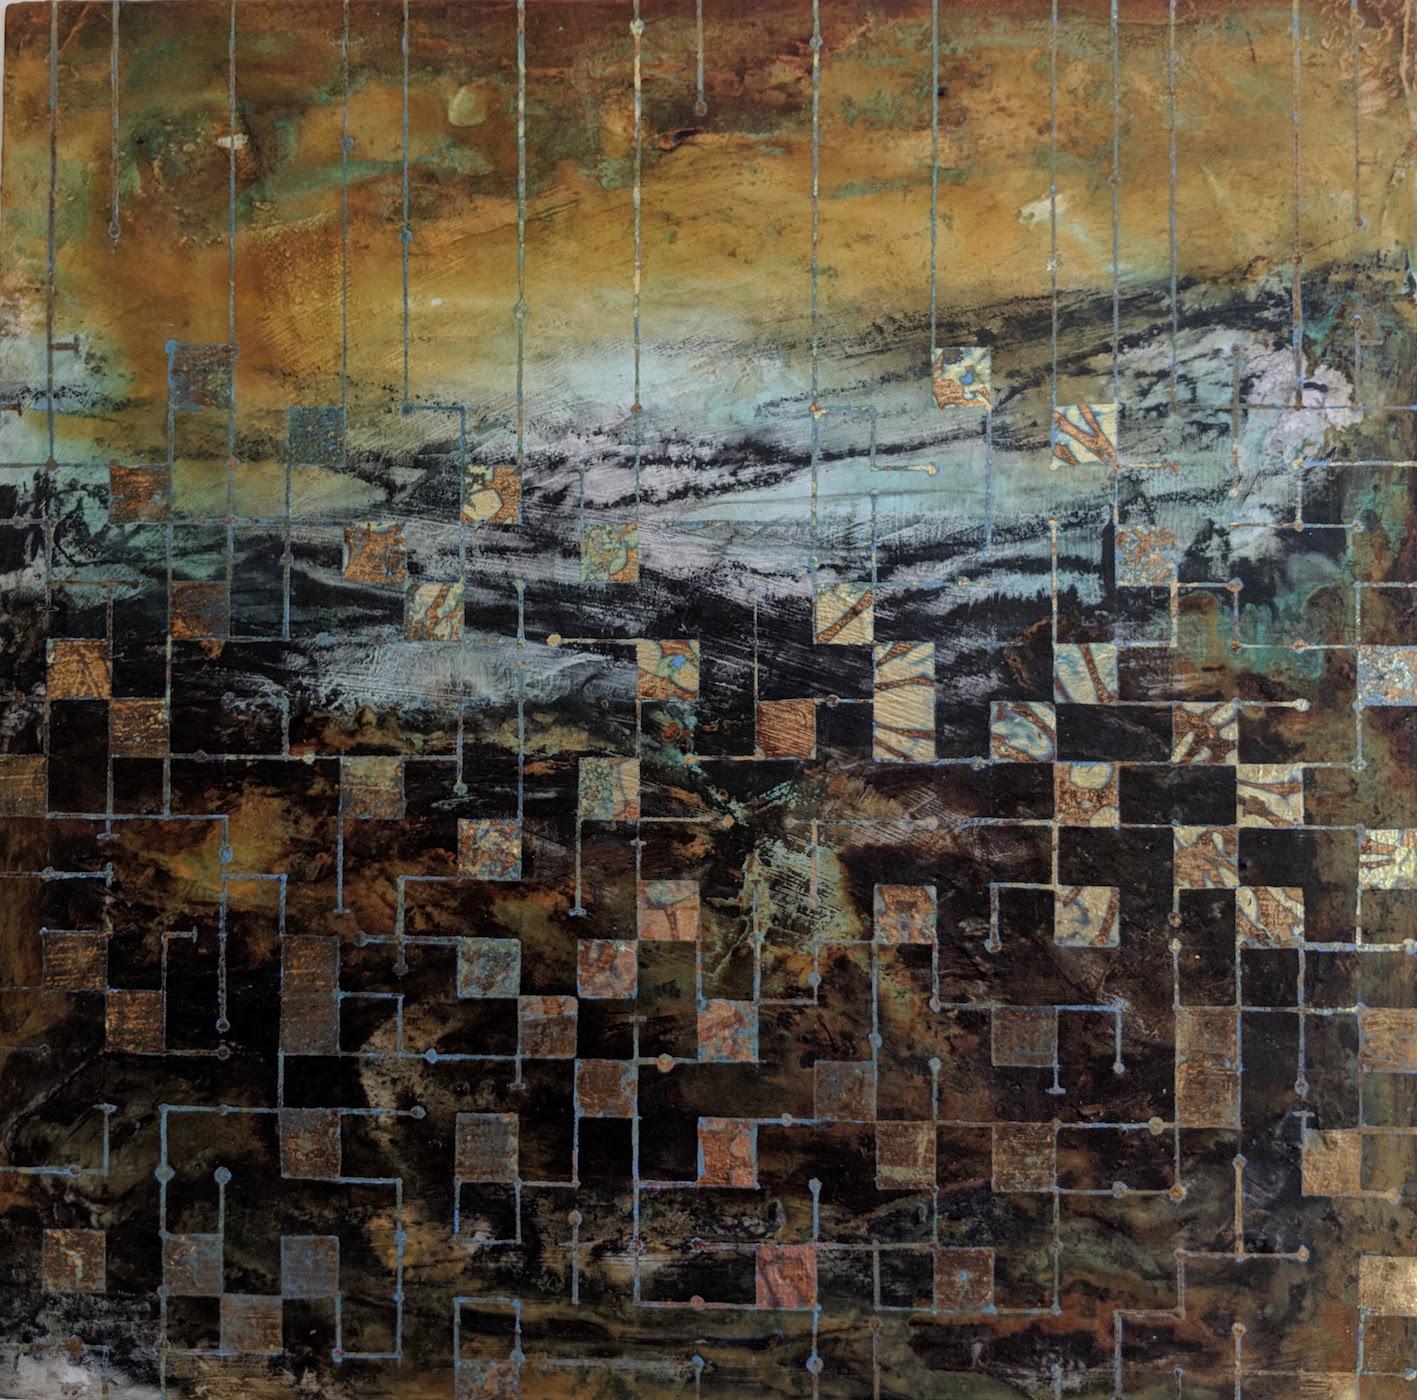 Lorraine Thorne Landscape Painting - Grids of communication, a mixed media painting, abstract art, landscape painting